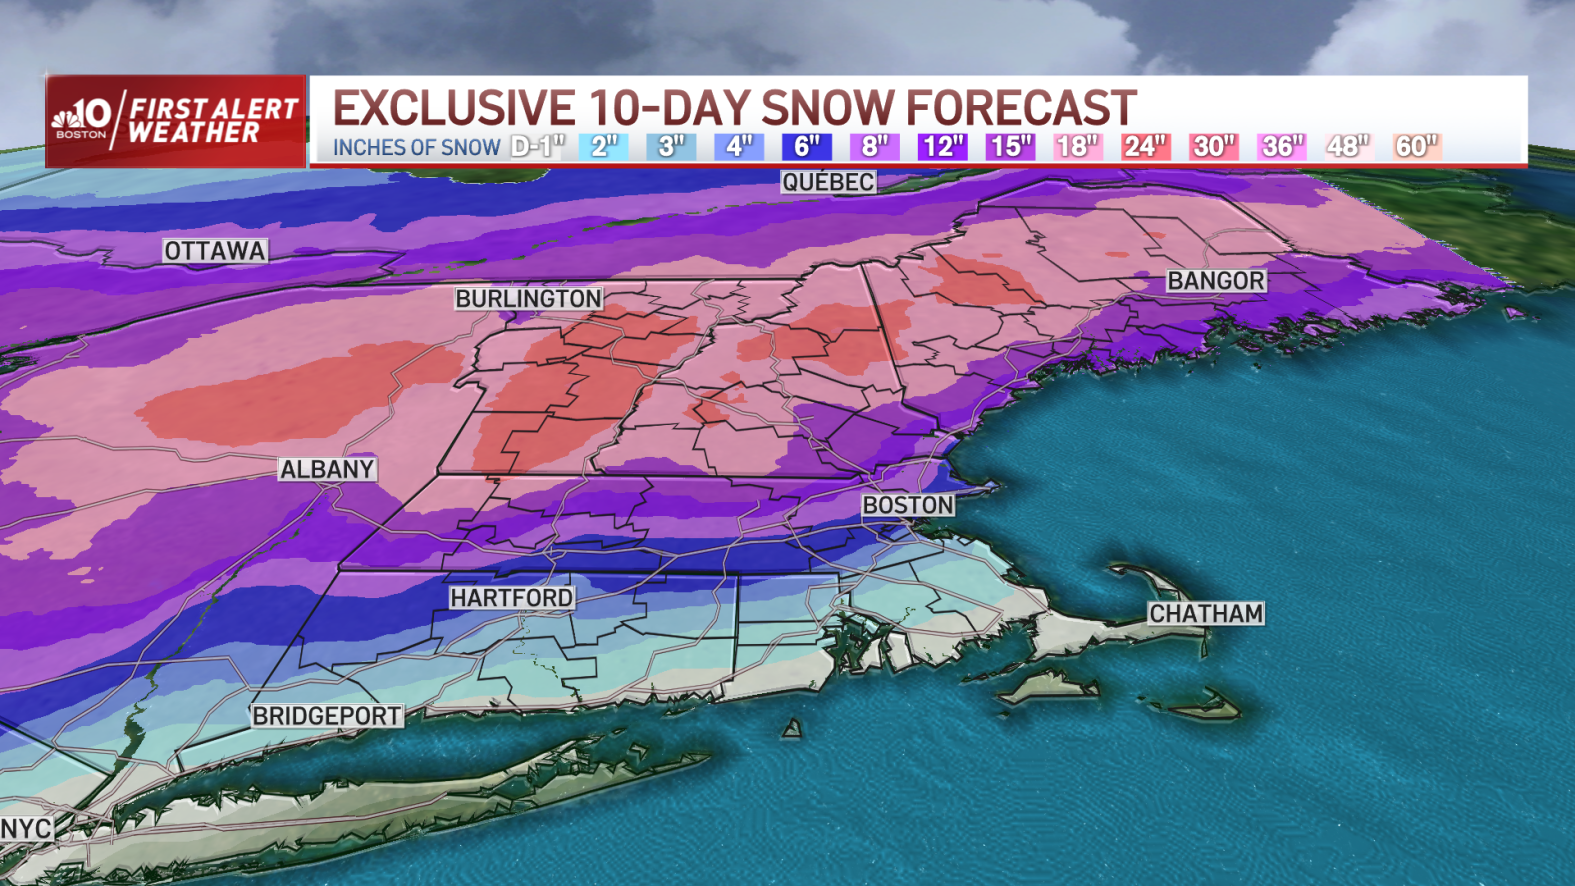 See Latest Snowfall Totals for Mass., New England as Storm Nears NBC